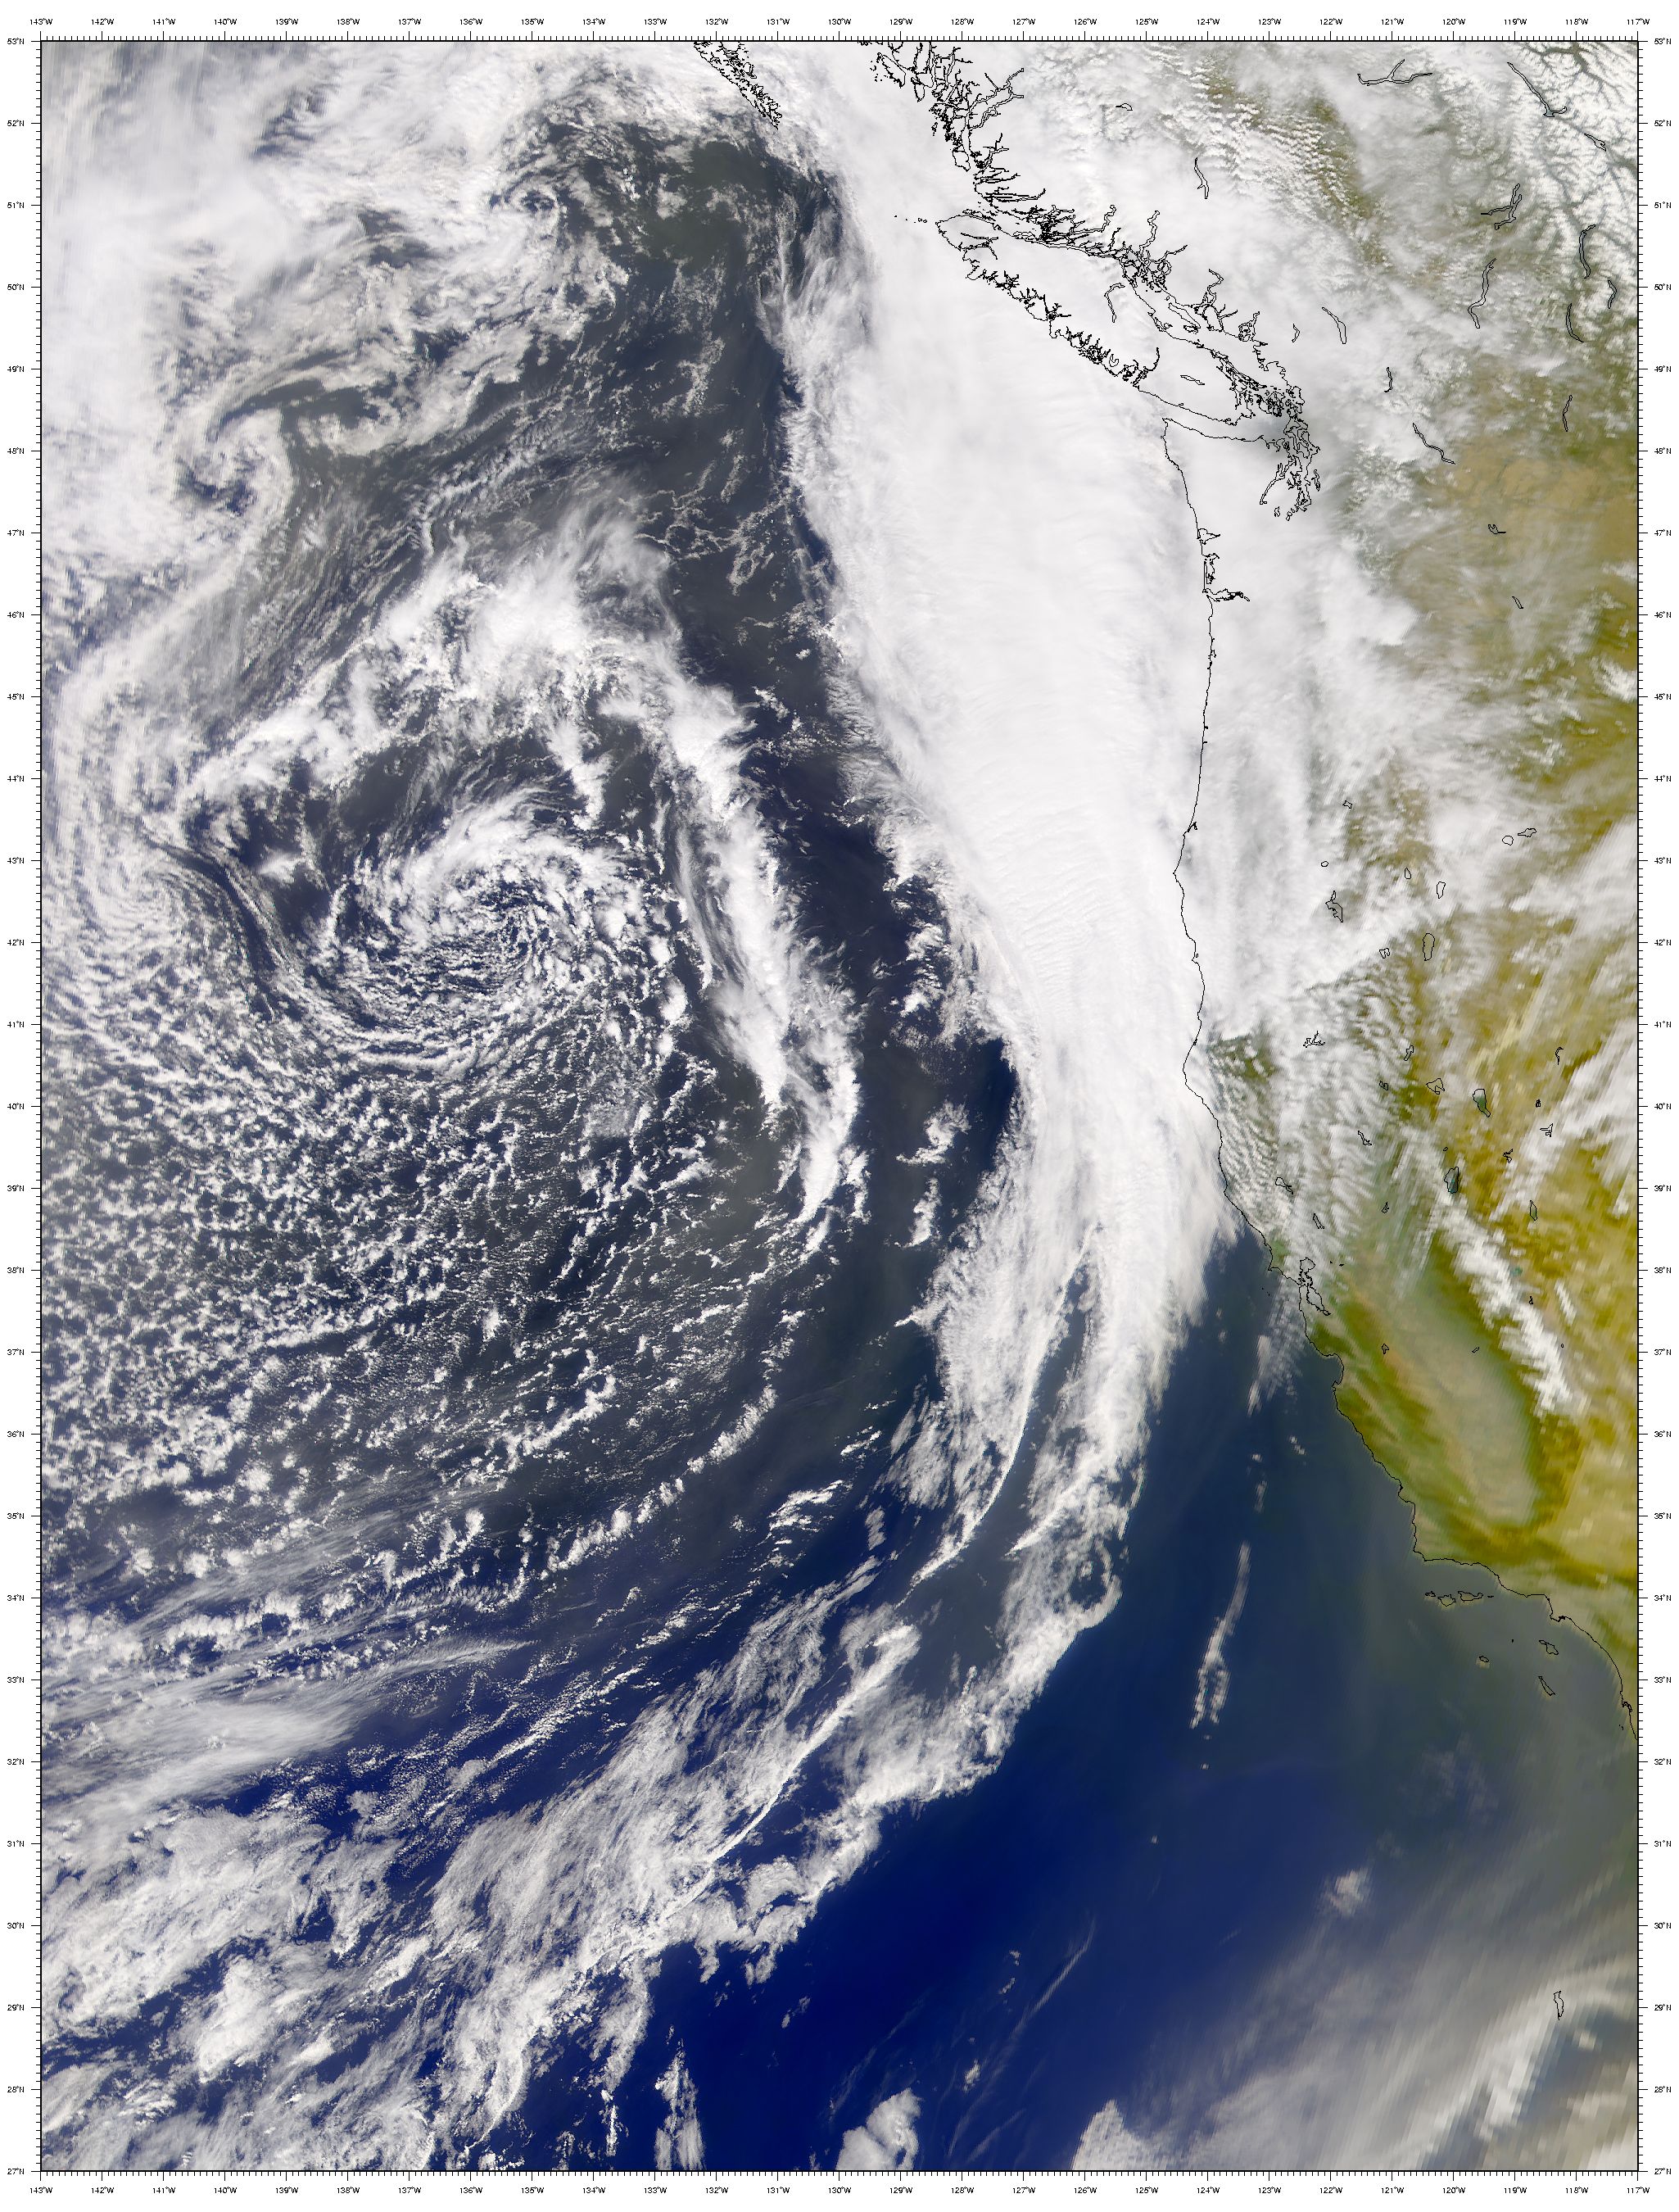 Asian Dust Arrives Over California - related image preview